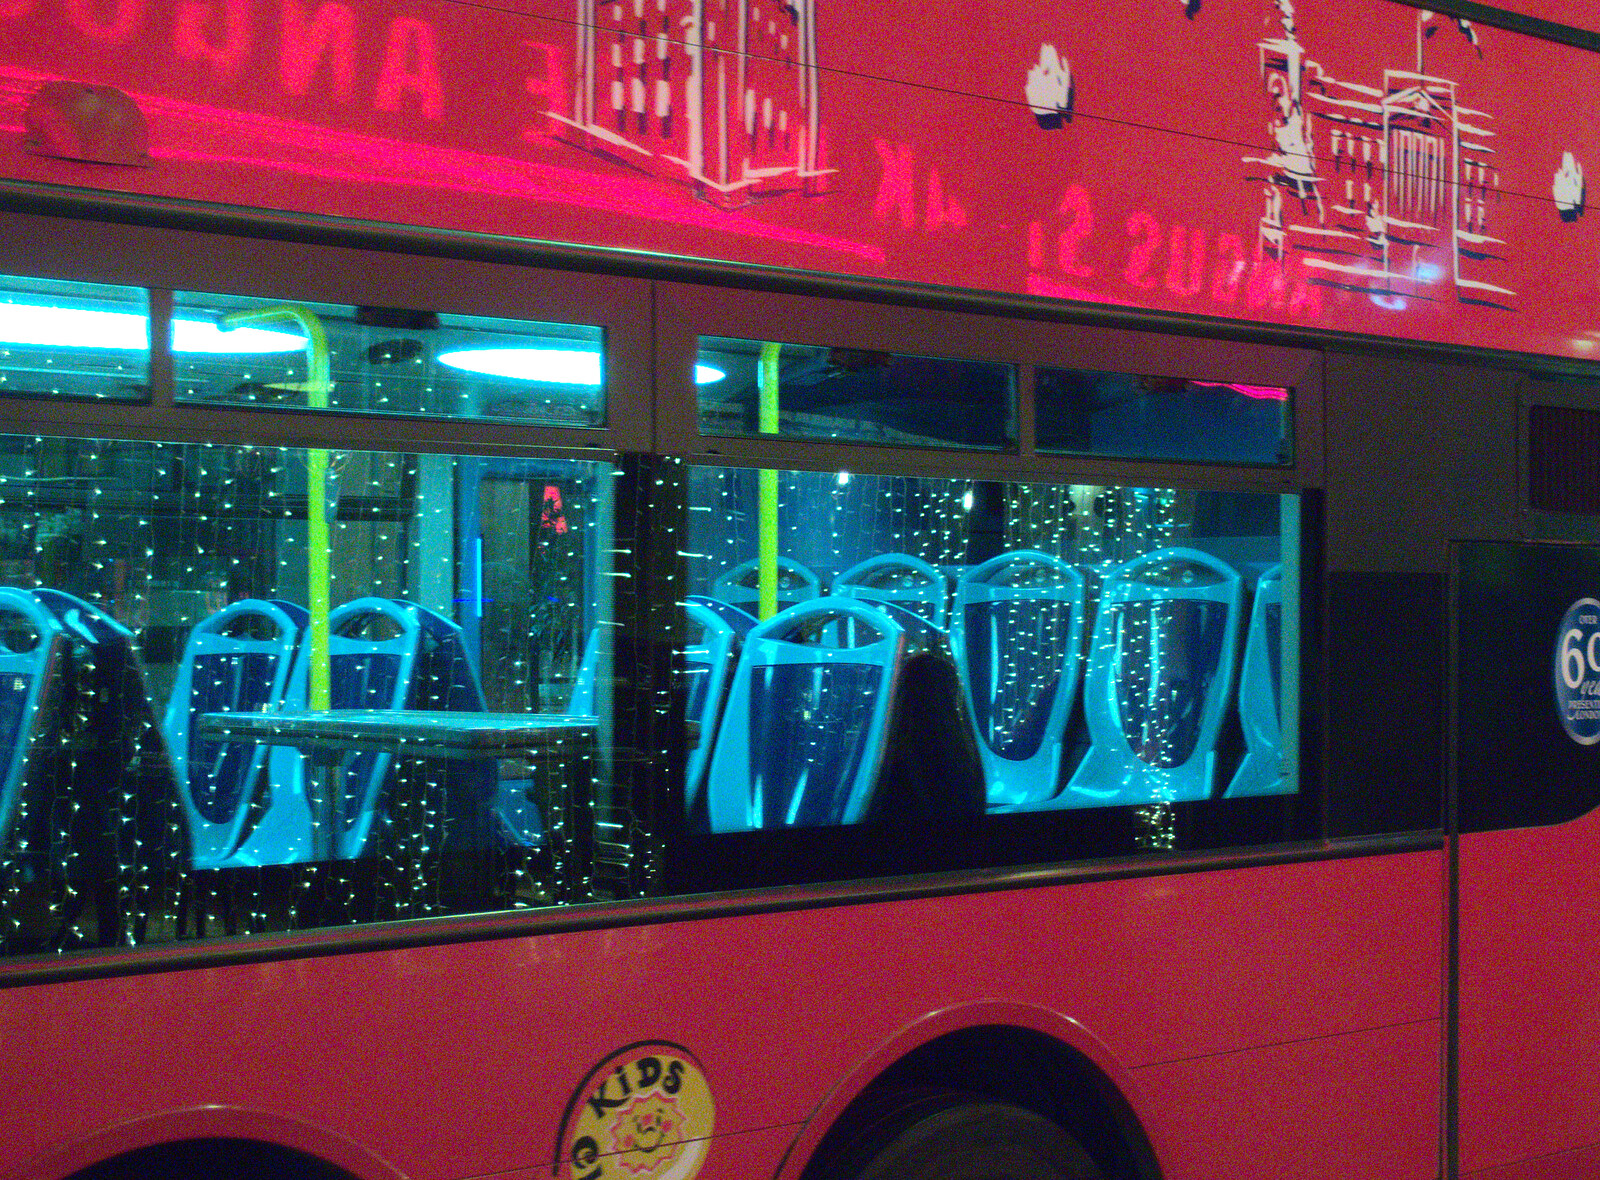 Light strings reflected in a passing bus from SwiftKey Innovation Nights, Westminster, London - 19th December 2014